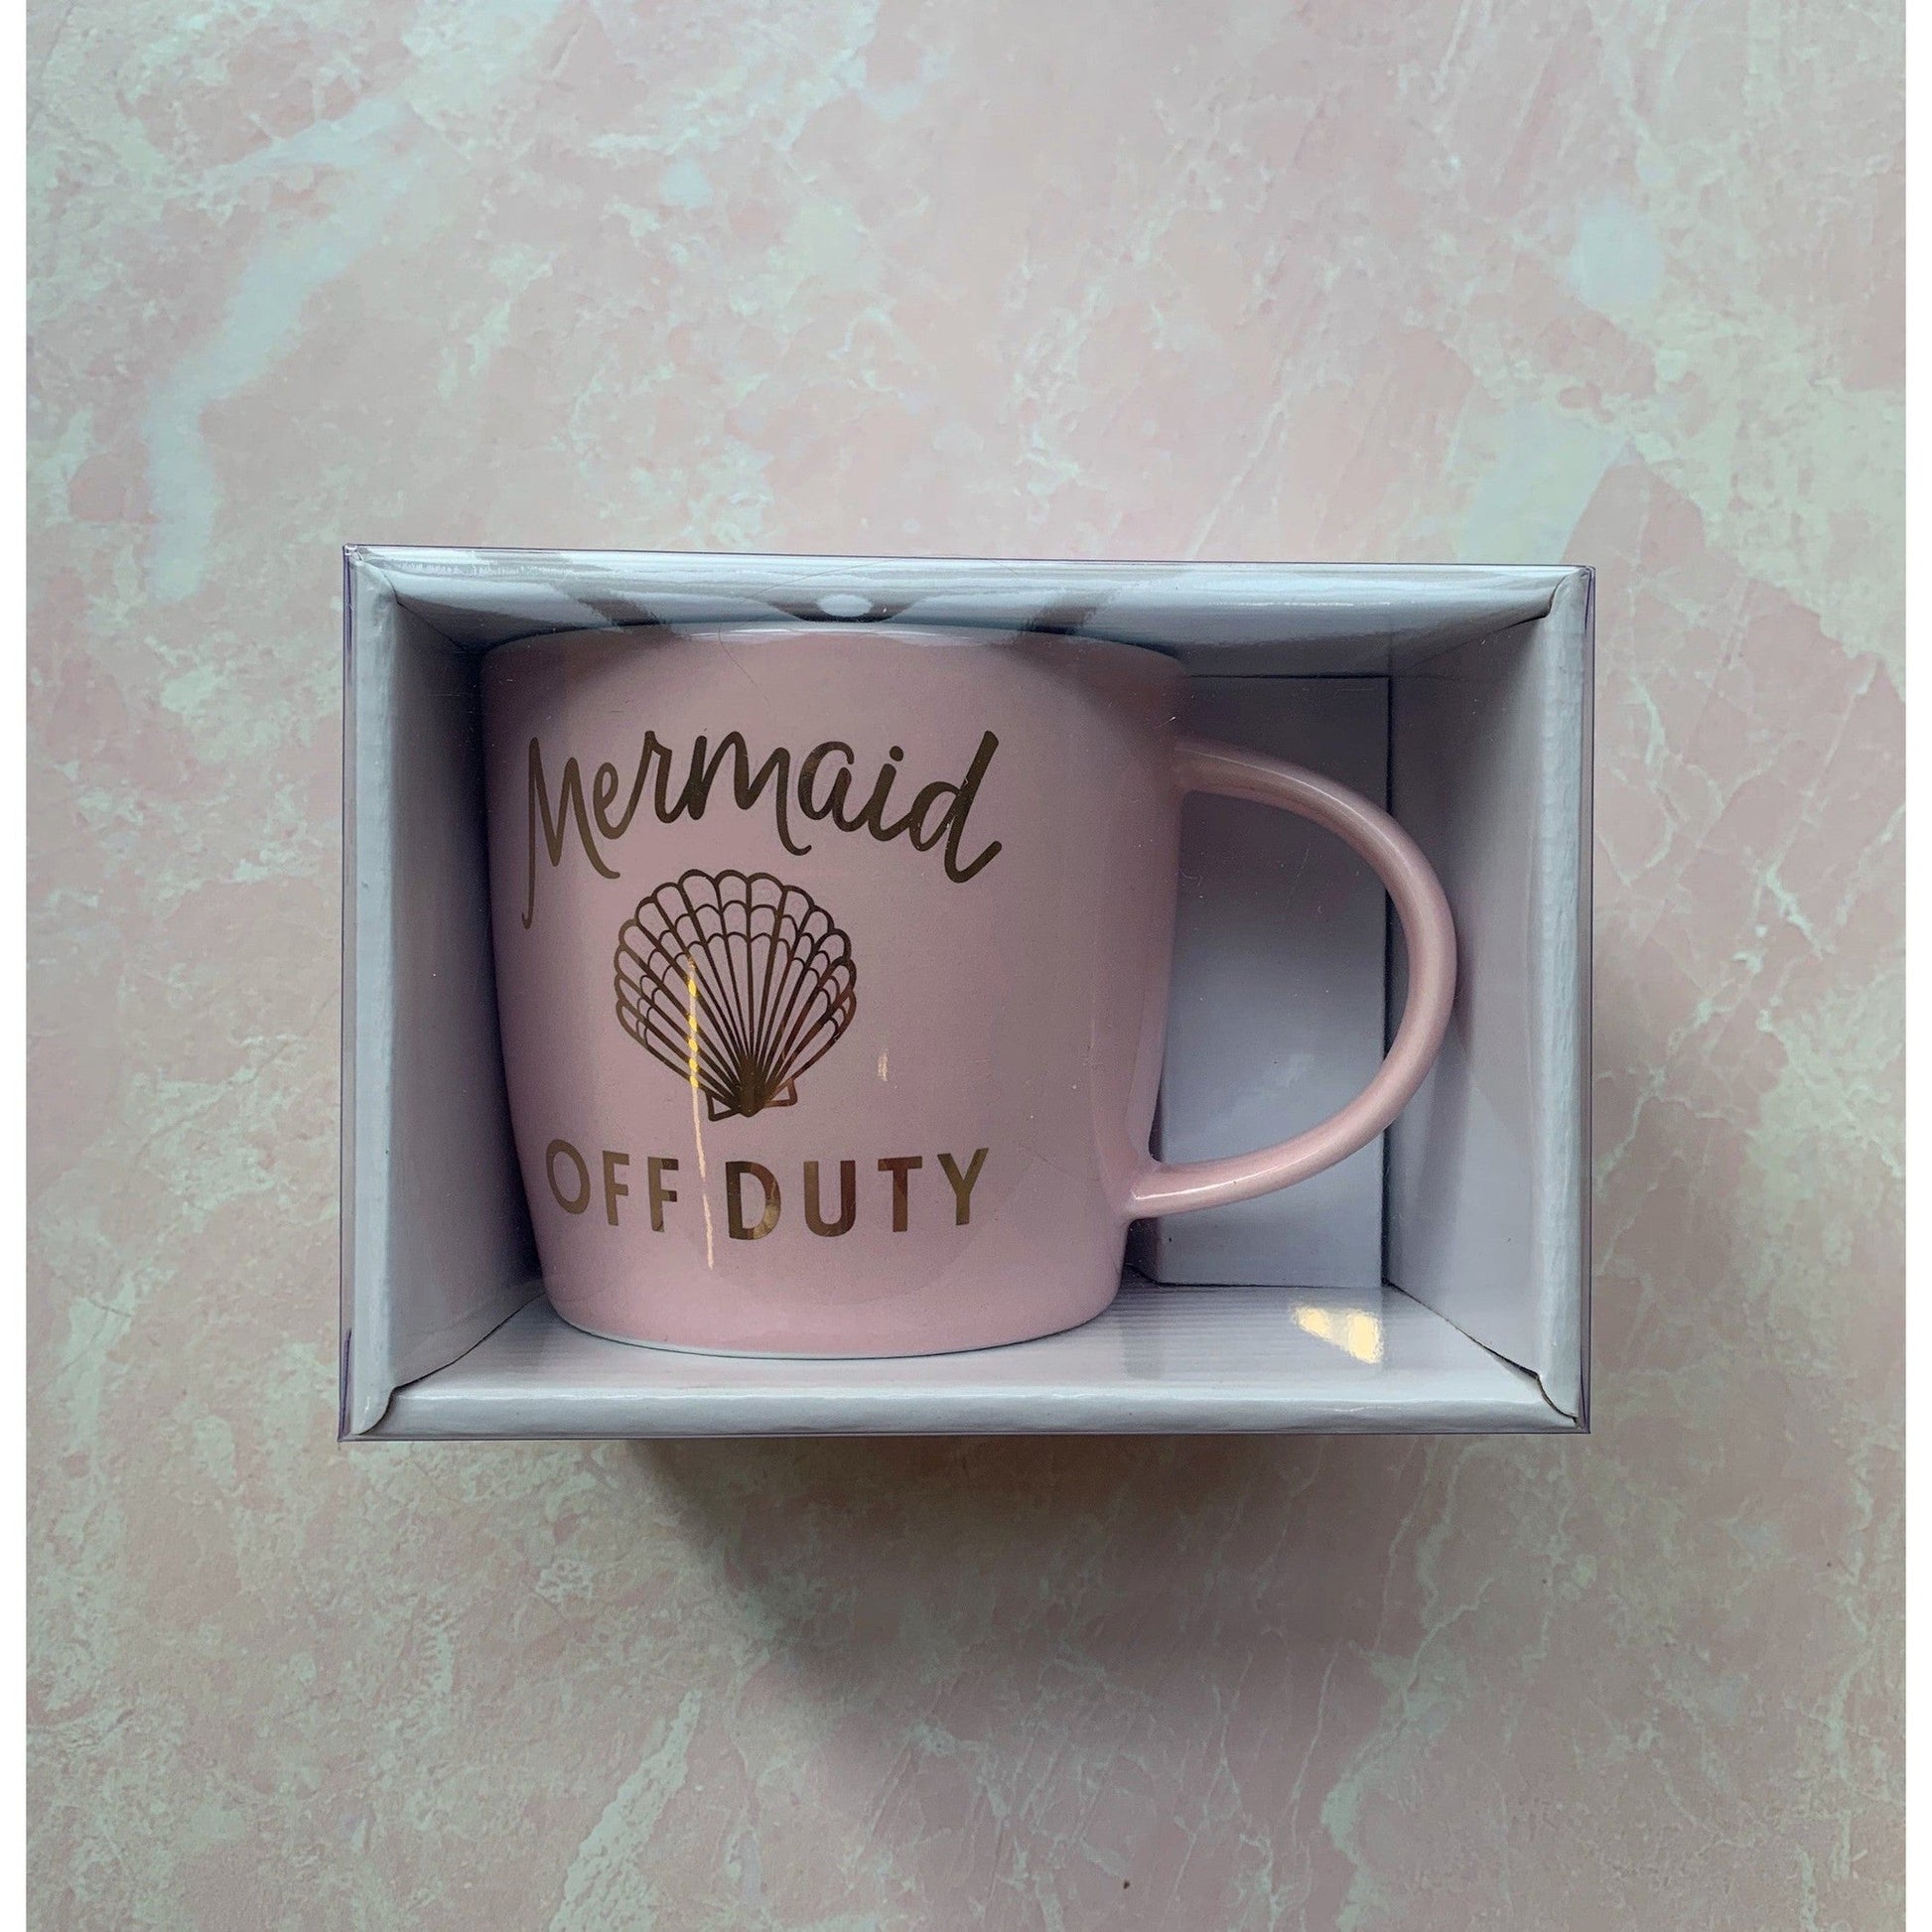 Mermaid Off Duty Coffee Mug in Pink with Gold Lettering | Porcelain